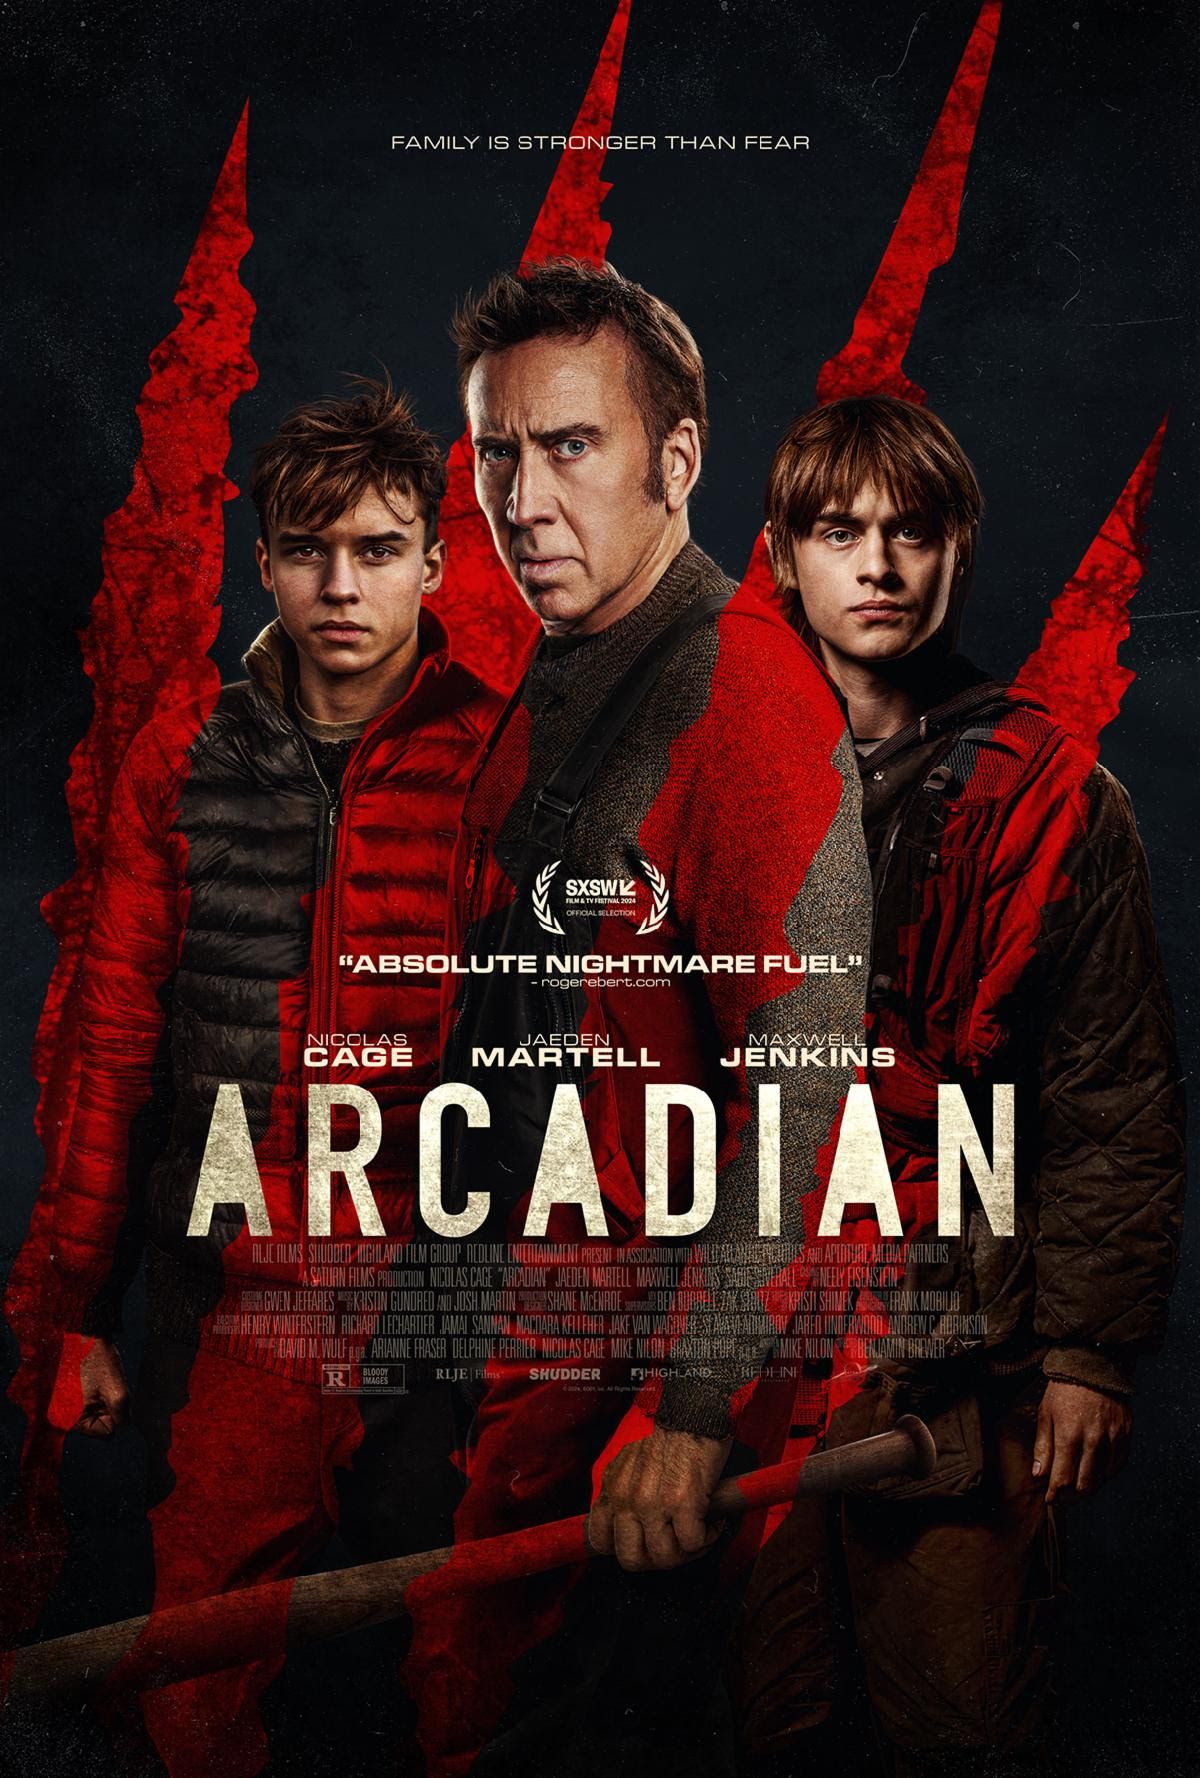 Arcadian Movie Poster Showing Nicolas Cage, Jaeden Martell, and Maxwell Jenkins